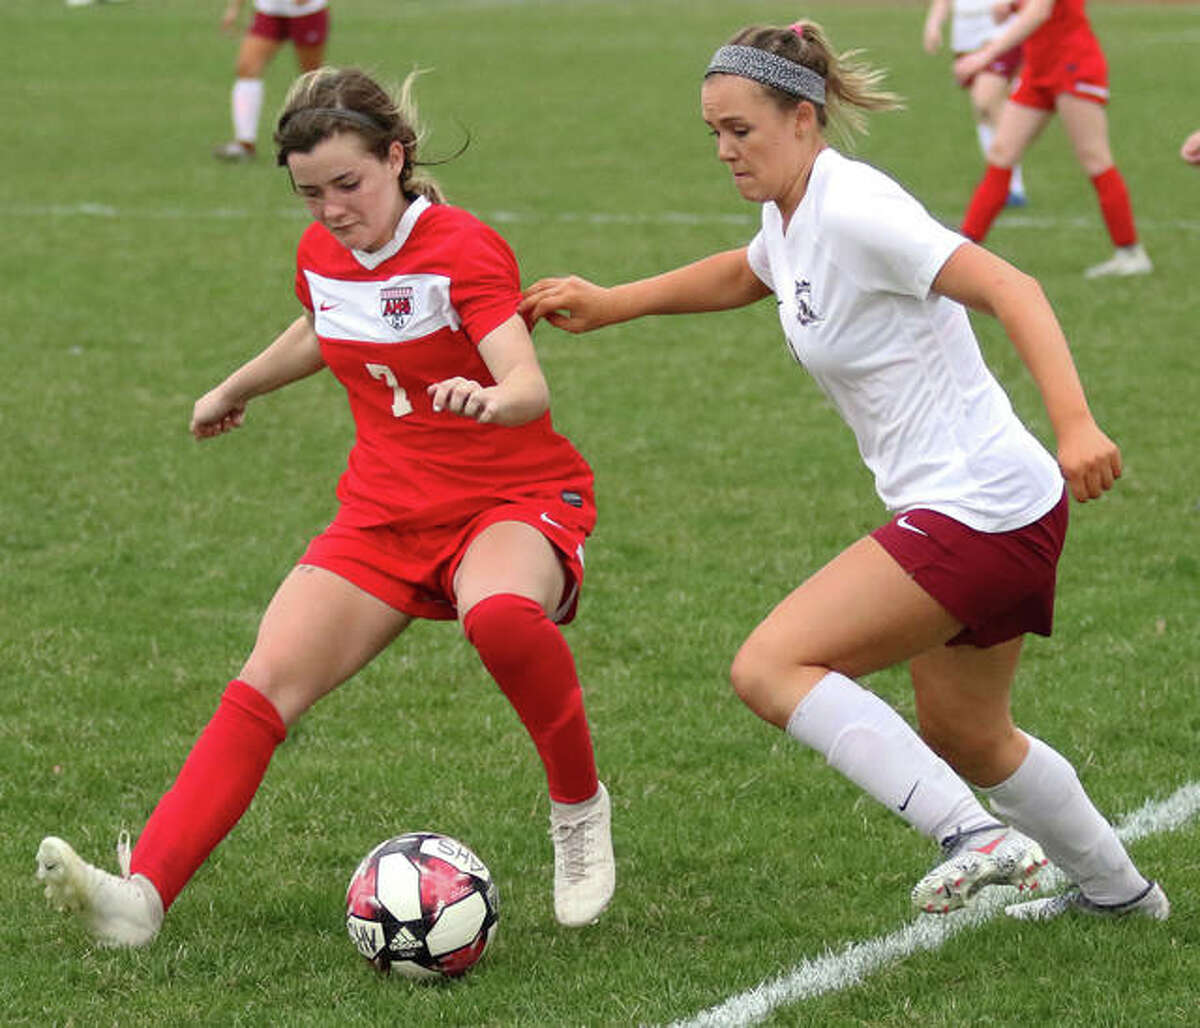 Alton’s Grace Nasello (left) possesses the ball against pressure from Belleville West’s Katelyn Grandcolas during the second half Thursday at Piasa Motor Fuels Field in Godfrey.